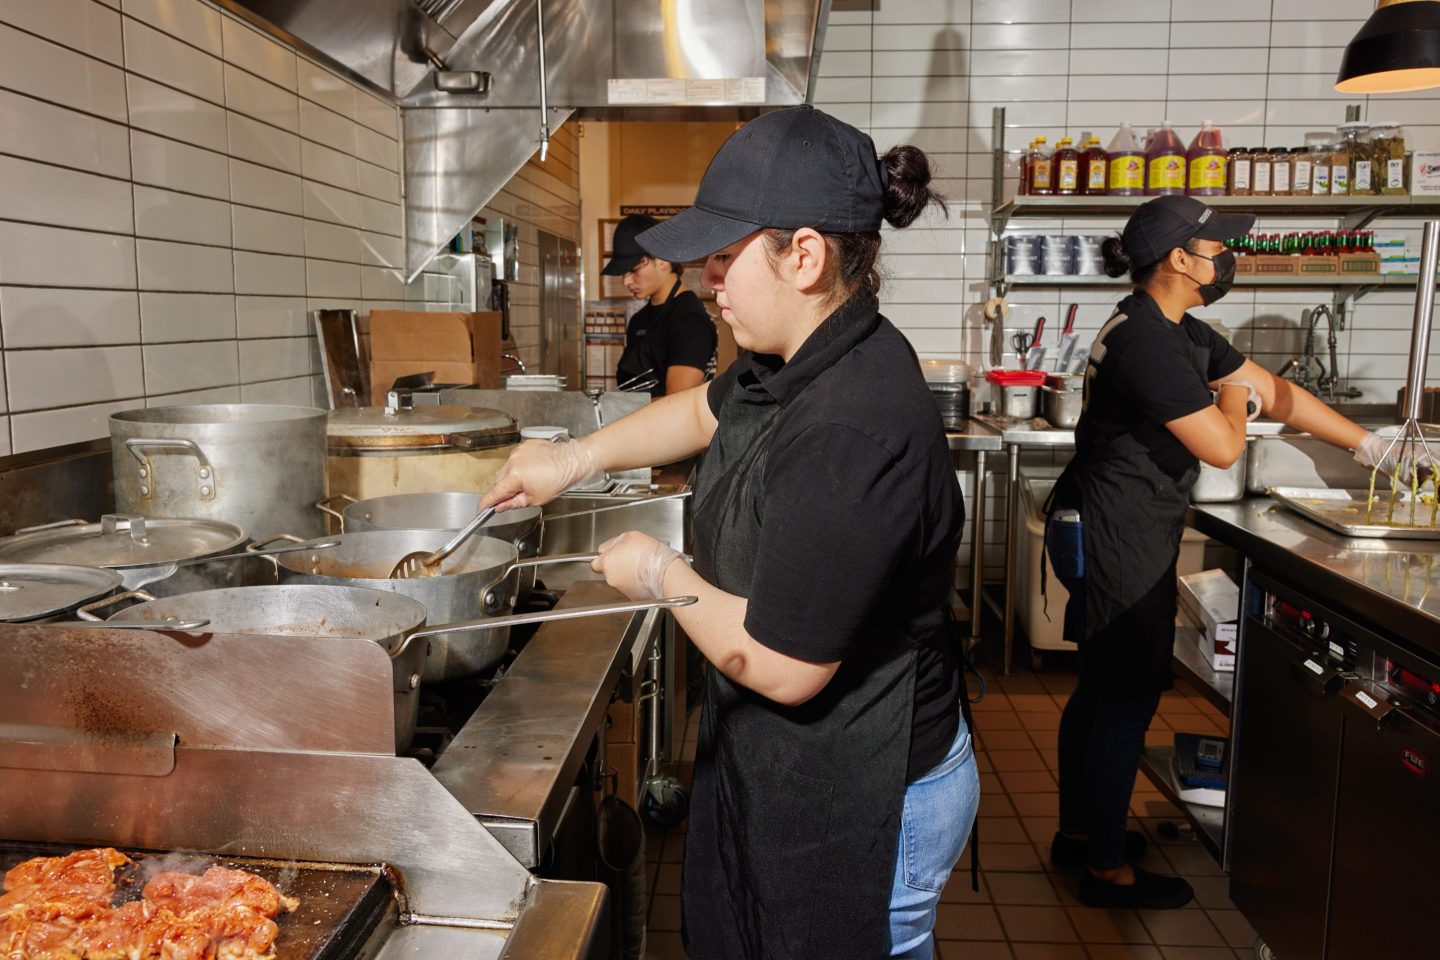 A Chipotle worker stirs beans cooking on the stove on the left while another peels avocados for guacamole on the right, at the Chipotle restaurant in Corona Del Mar, California.